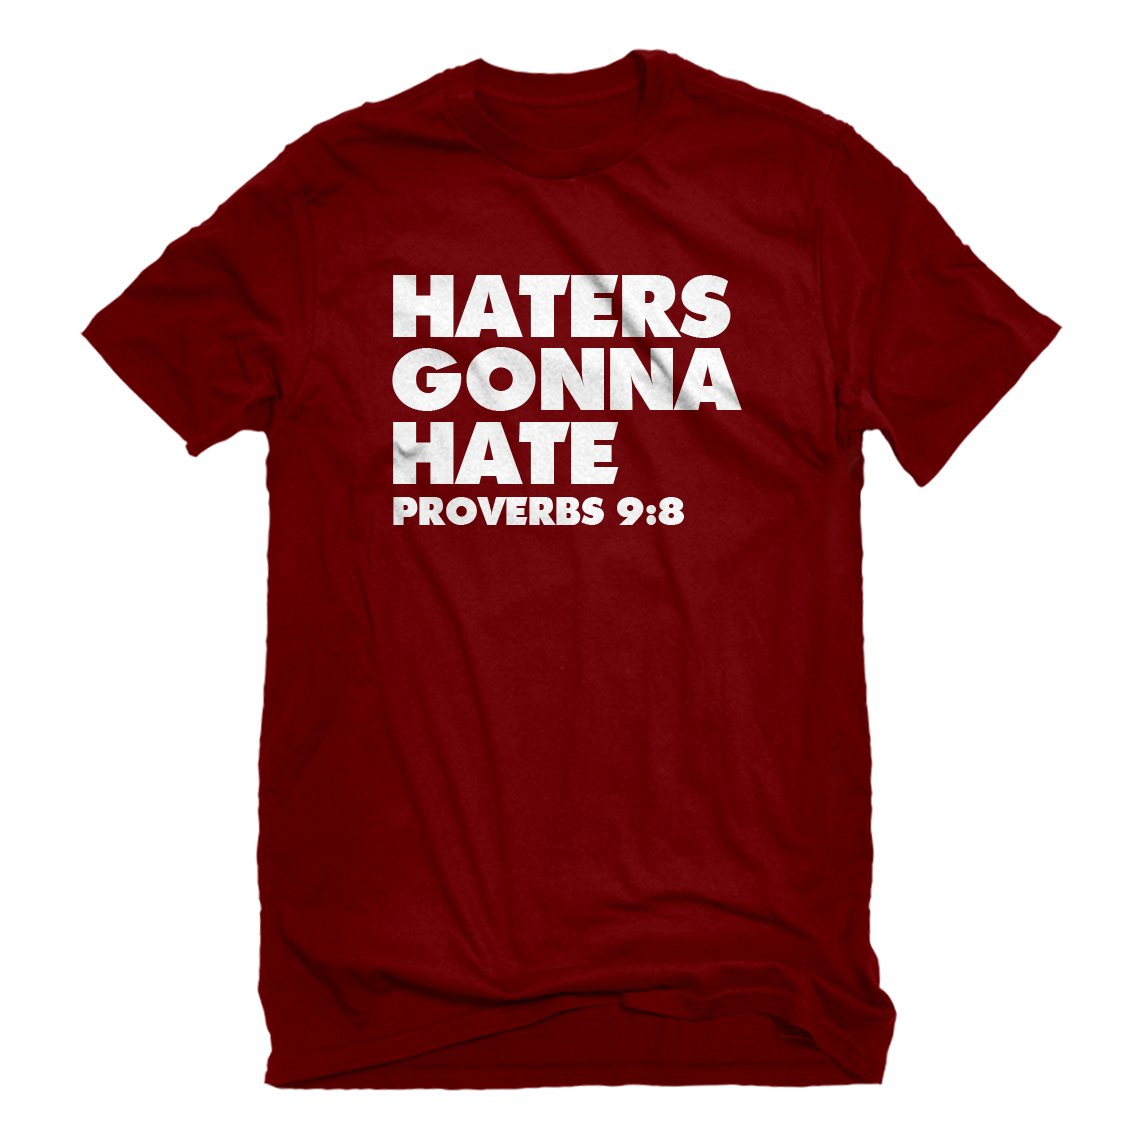 List 101+ Images haters gonna hate proverbs 9 8 shirt Completed